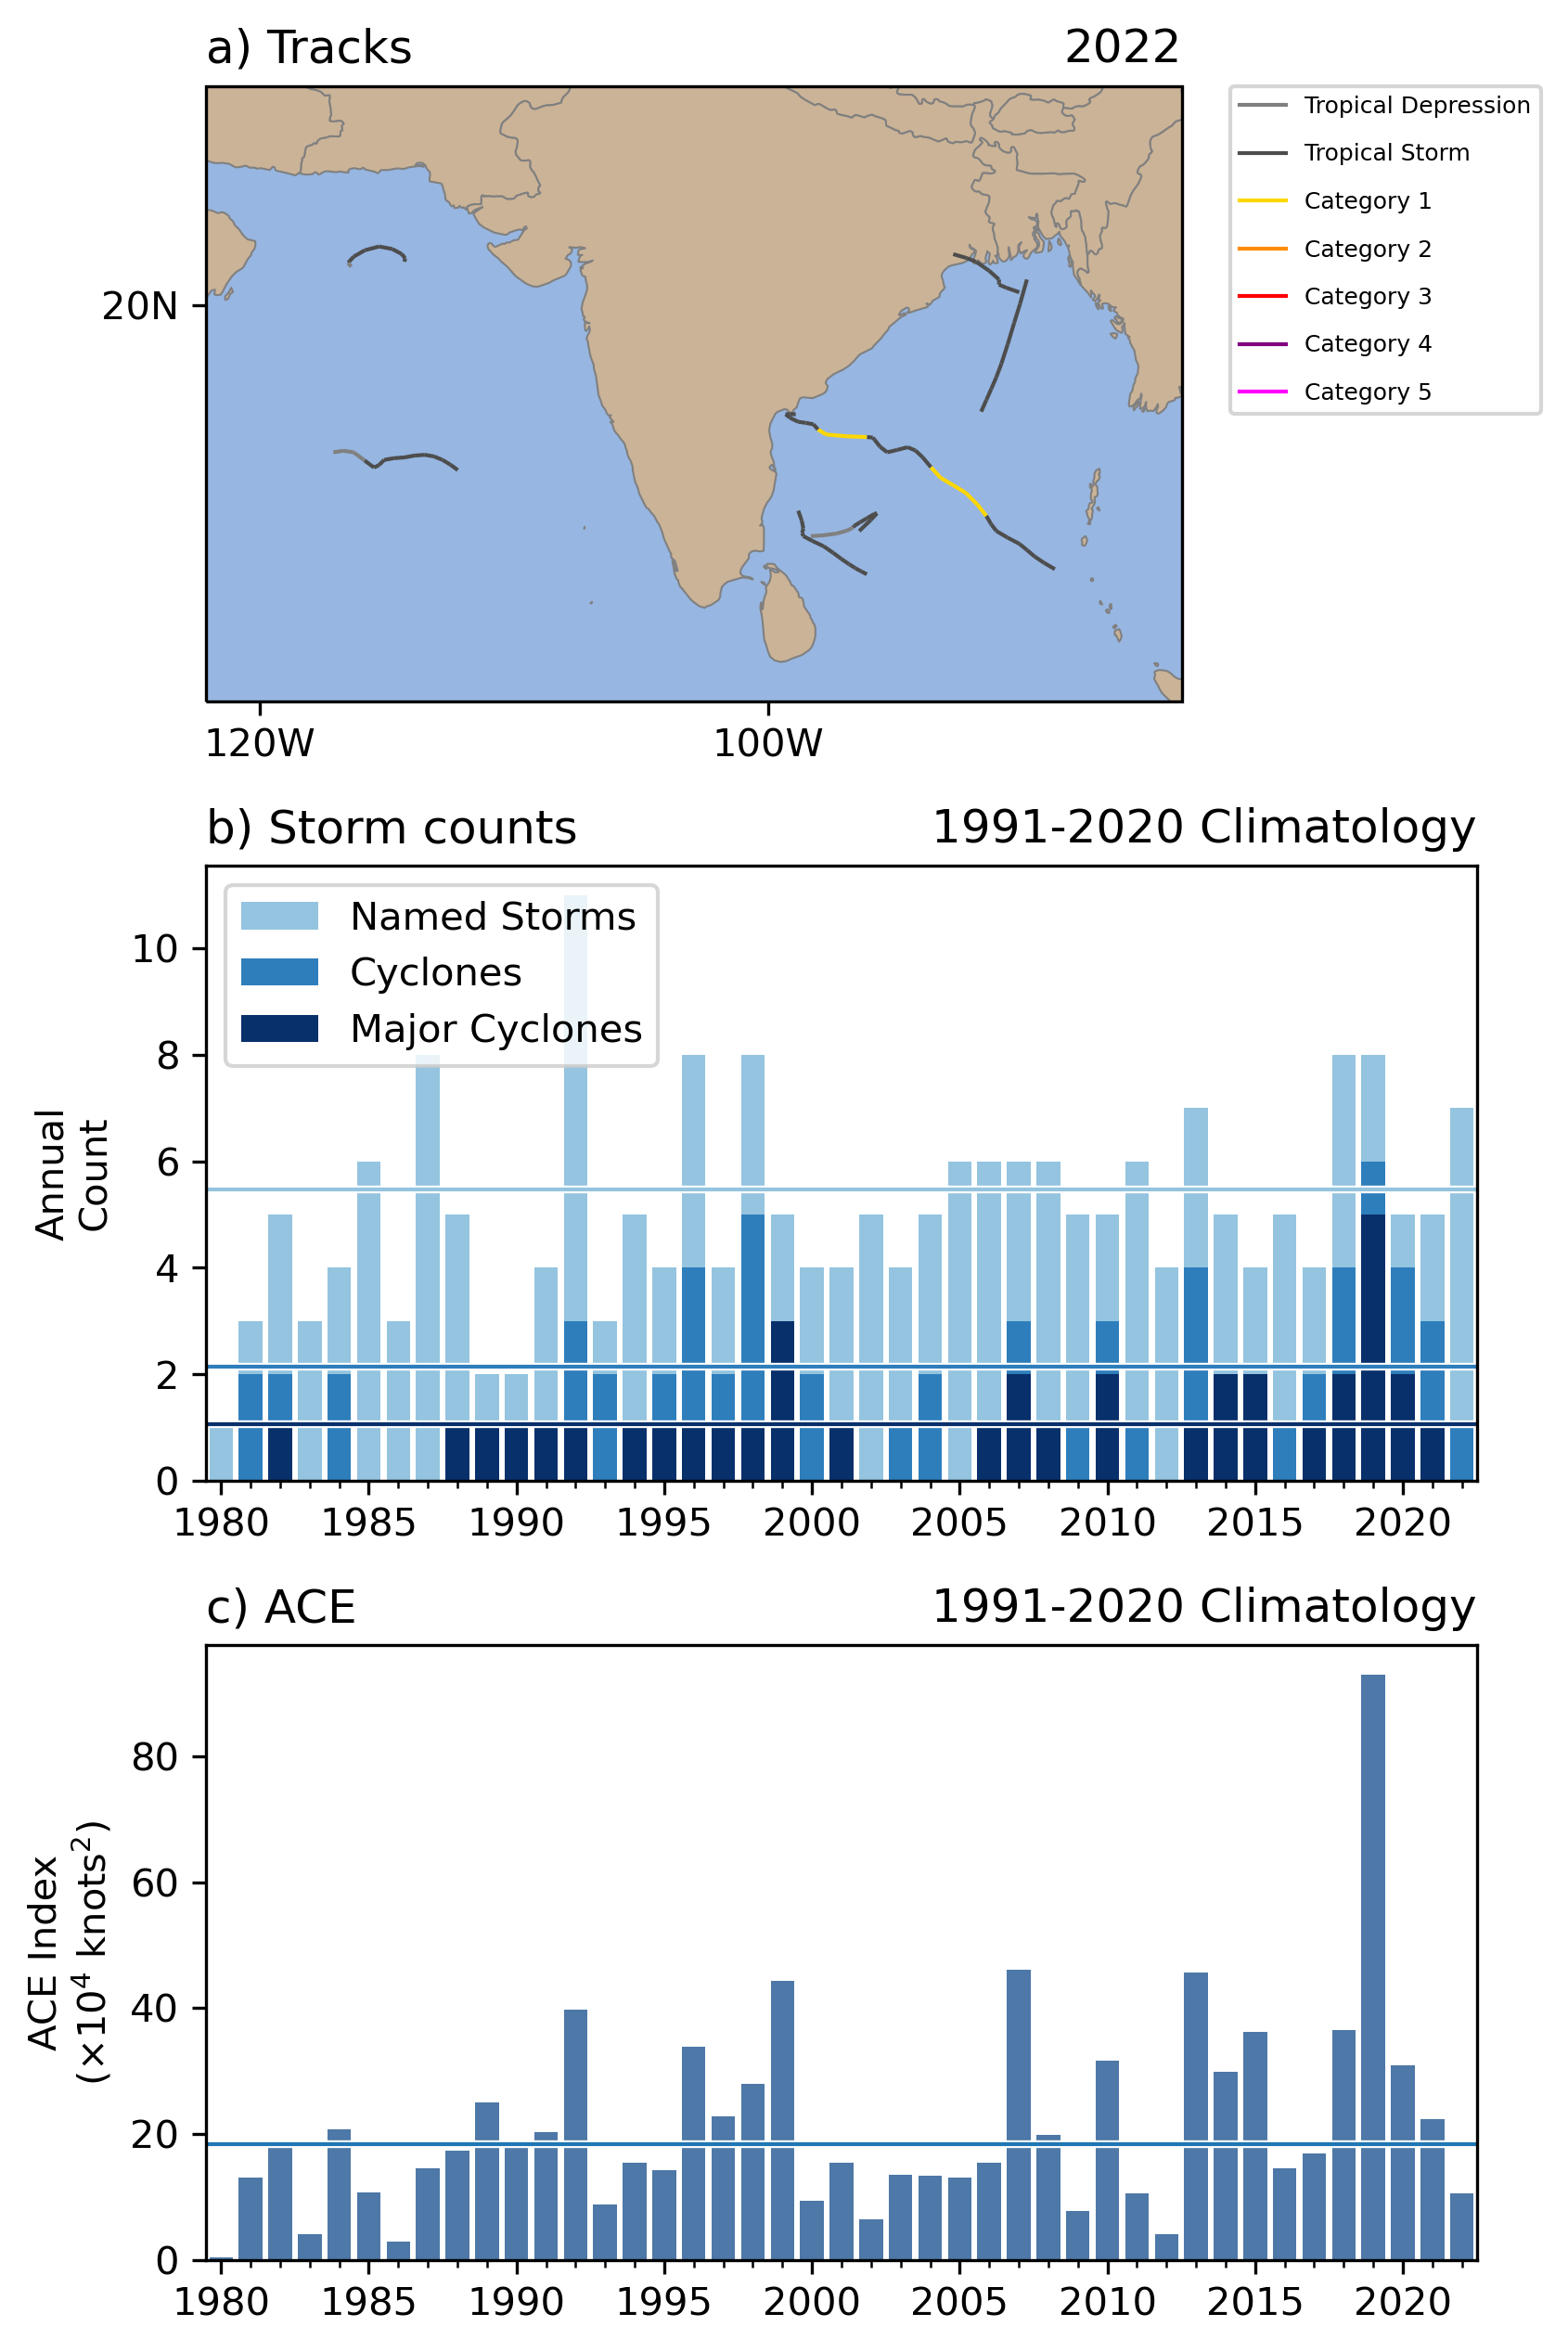 North Indian Tropical Cyclone Storm Tracks January-December 2022